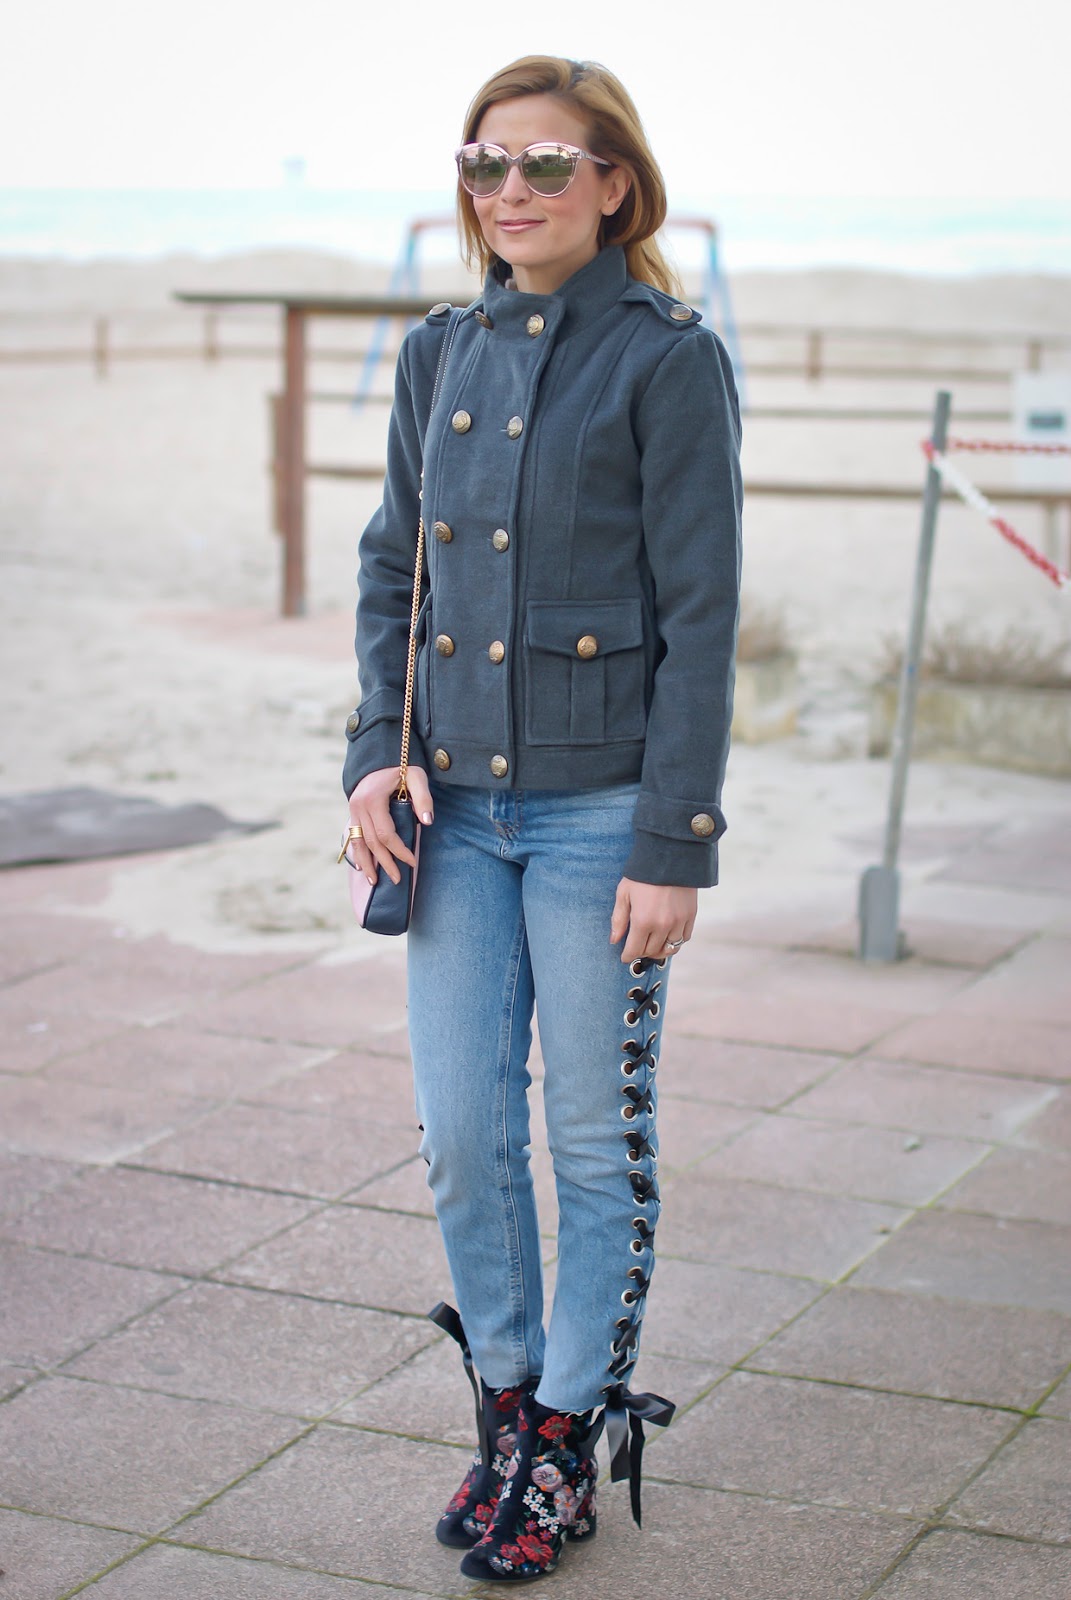 Eyelet jeans and Dresslink grey military jacket on Fashion and Cookies fashion blog, fashion blogger style